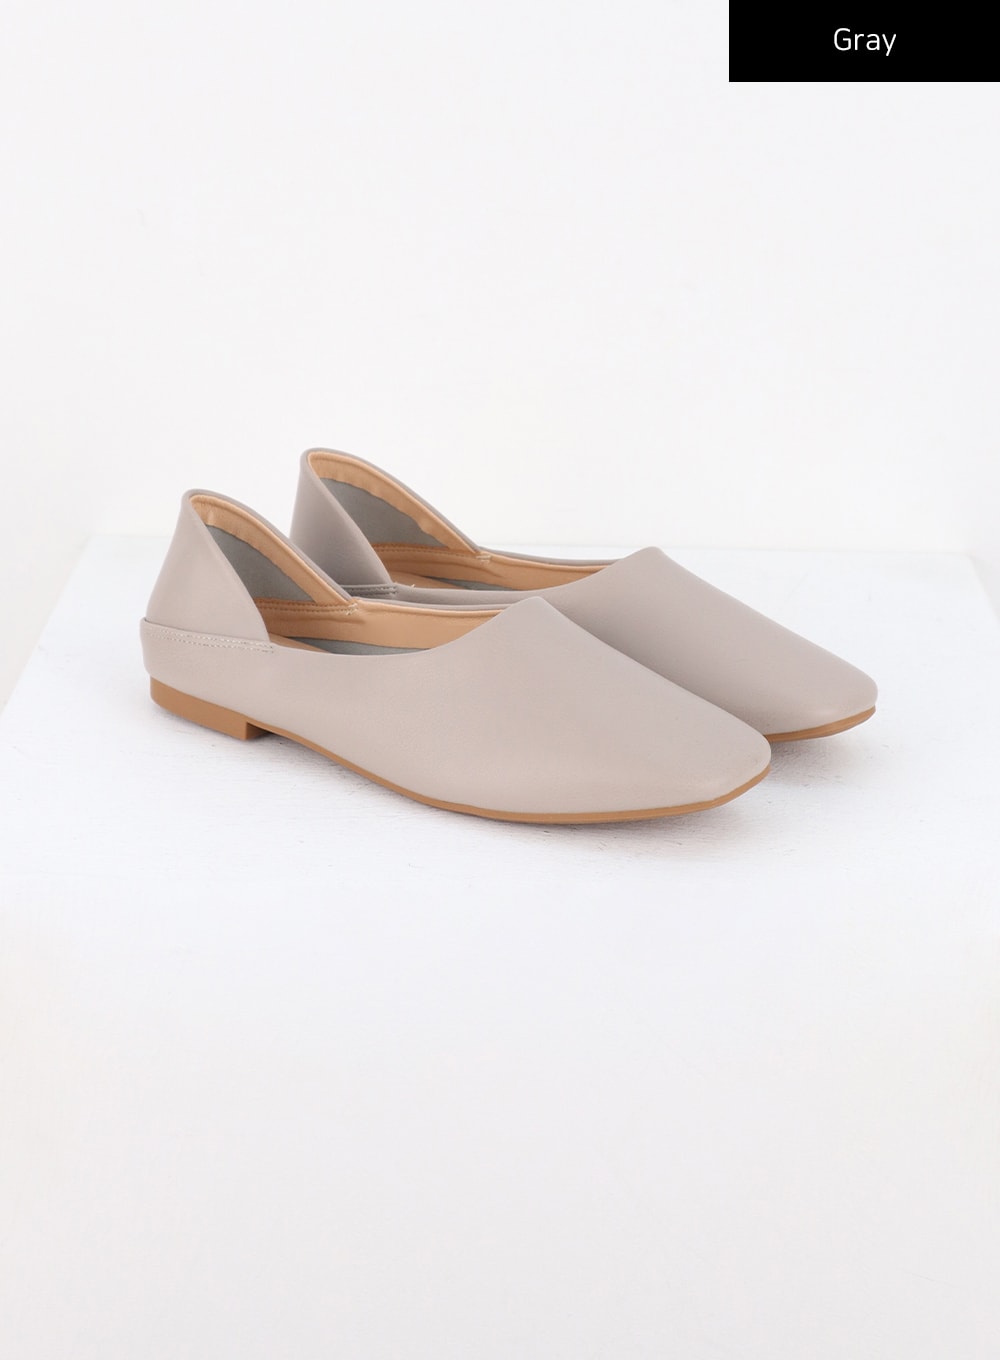 faux-leather-flat-shoes-io311 / Gray